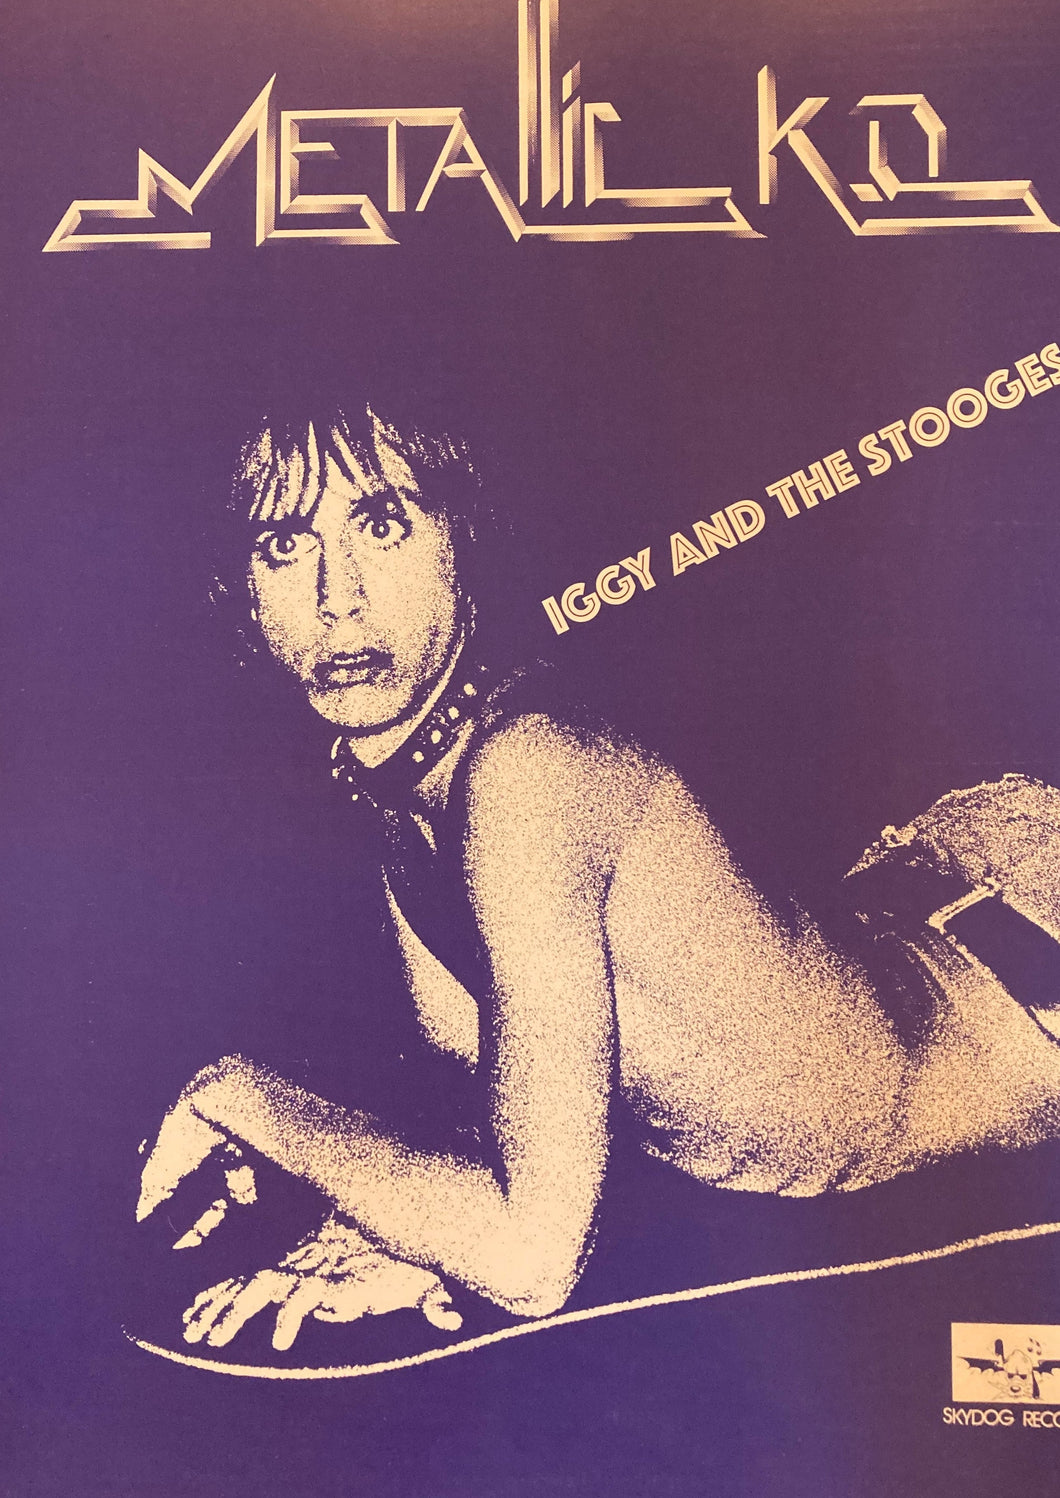 Iggy Pop & Stooges poster - Metallic KO promo fantastic new reprinted edition - Original Music and Movie Posters for sale from Bamalama - Online Poster Store UK London